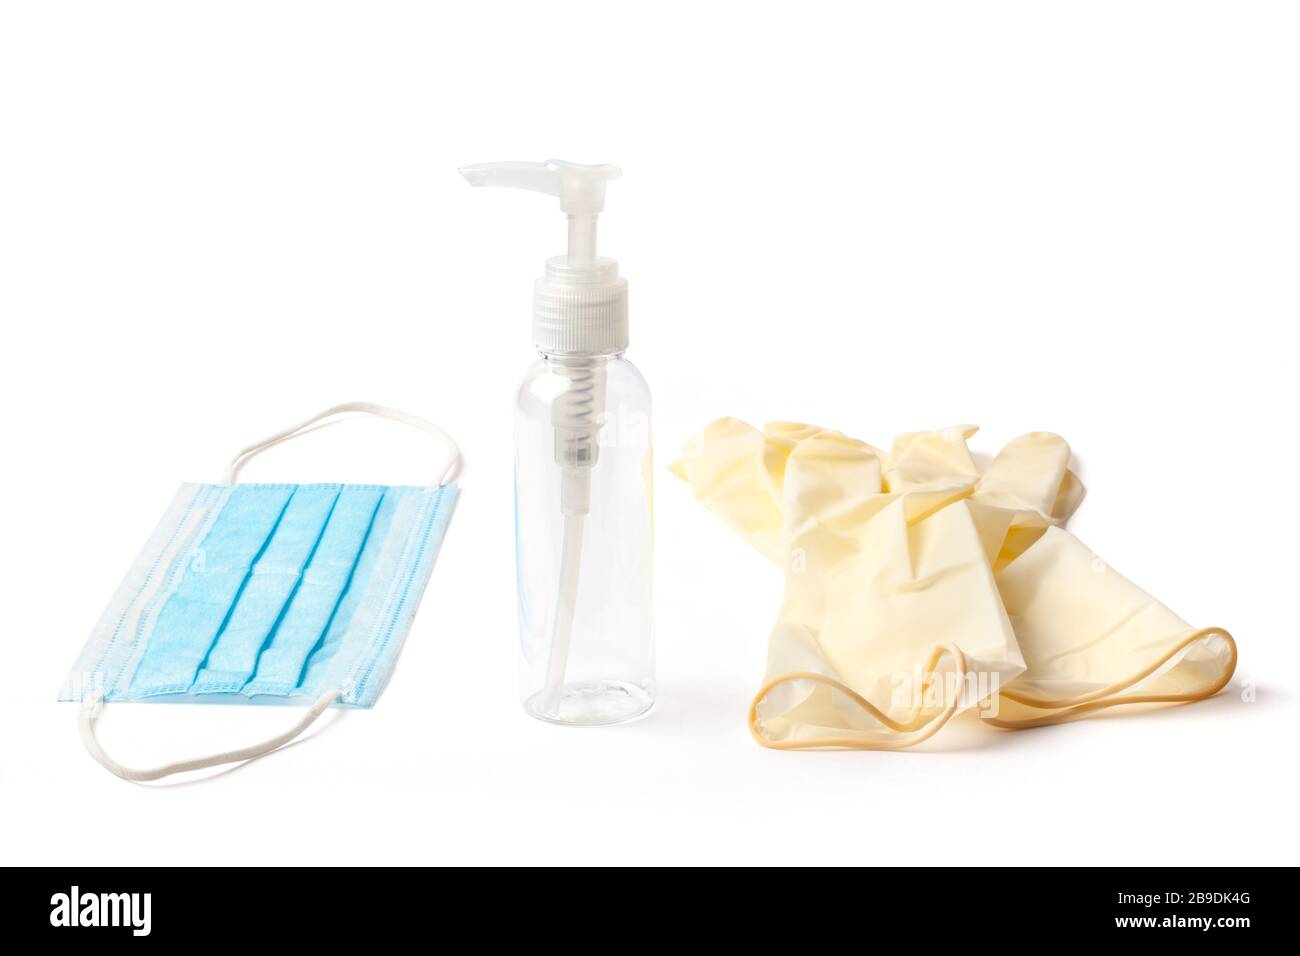 Personal medical protective equipment, mask, sterile gloves, and disinfectants for virus protection Stock Photo